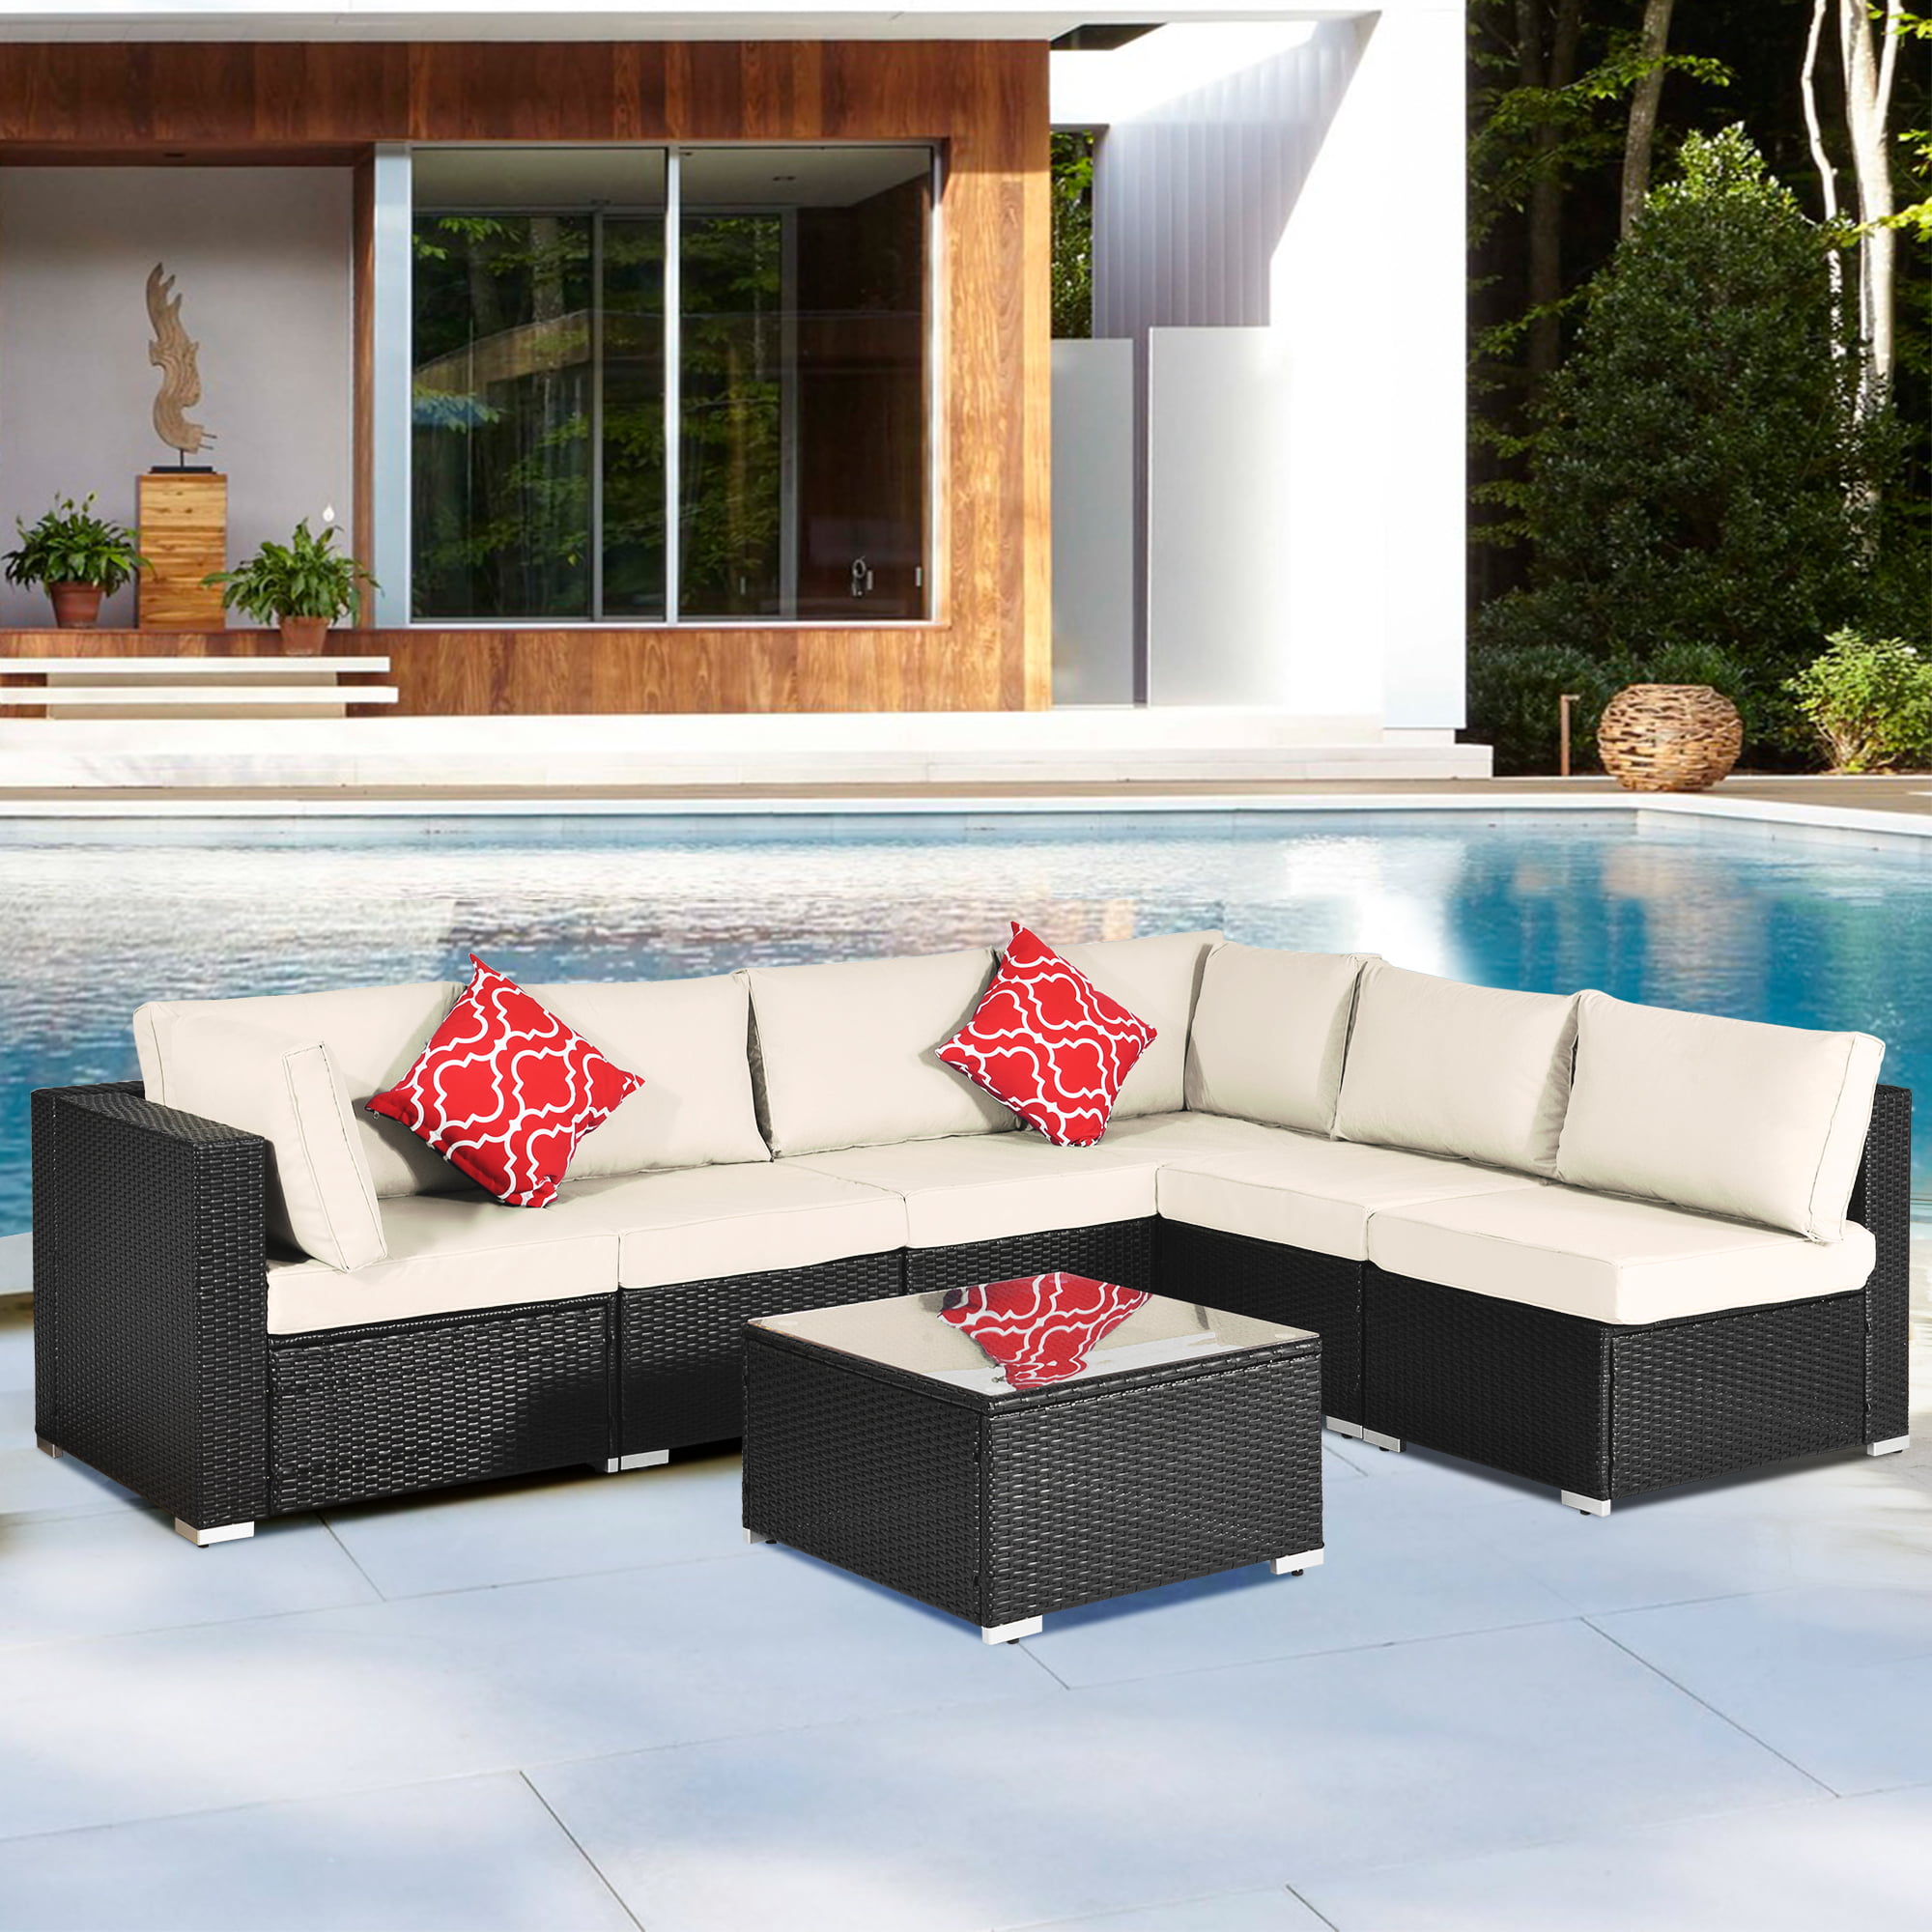 7 PCS Wicker Outdoor Conversation Furniture Set Patio Couch Sectional Sofa All-Weather Brown Rattan with Beige Cushions Glass Coffee Table 